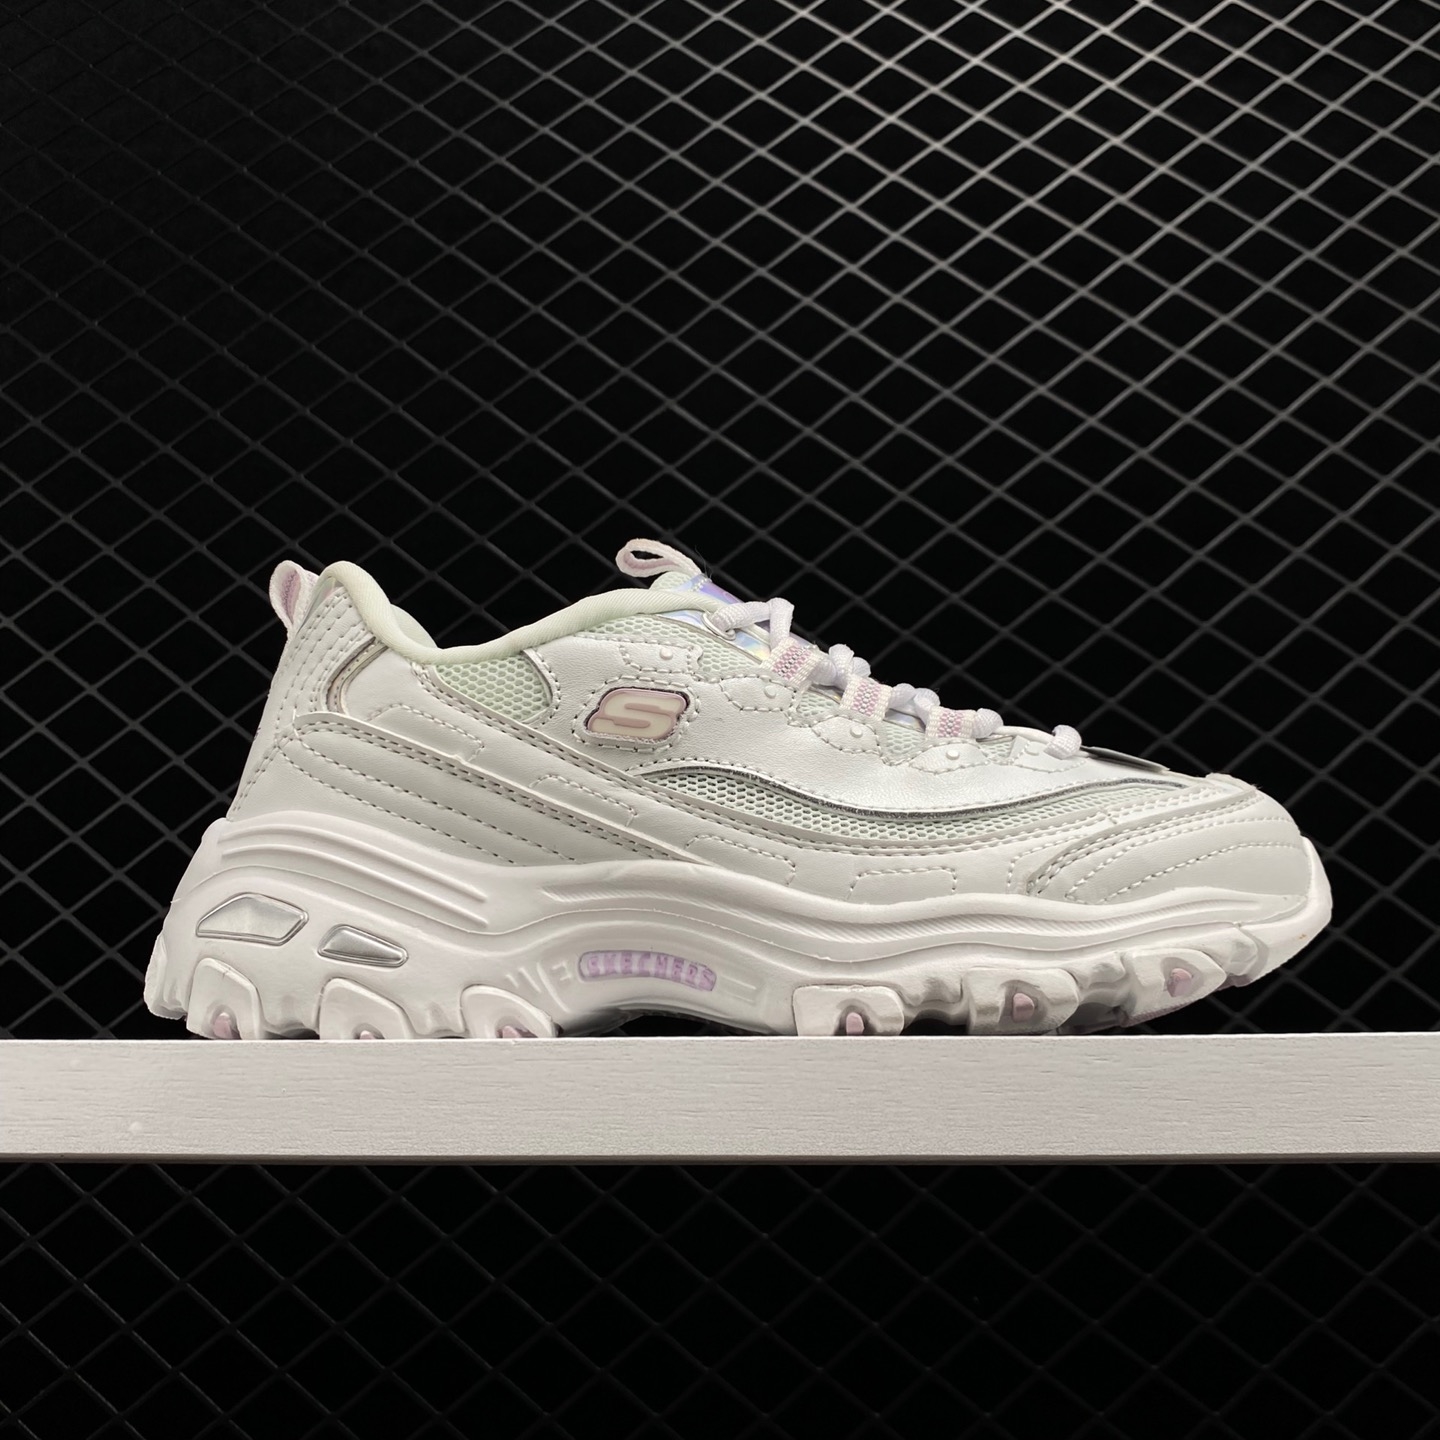 Skechers D'Lites 1.0 White Lavender - Stylish and Comfy Sneakers